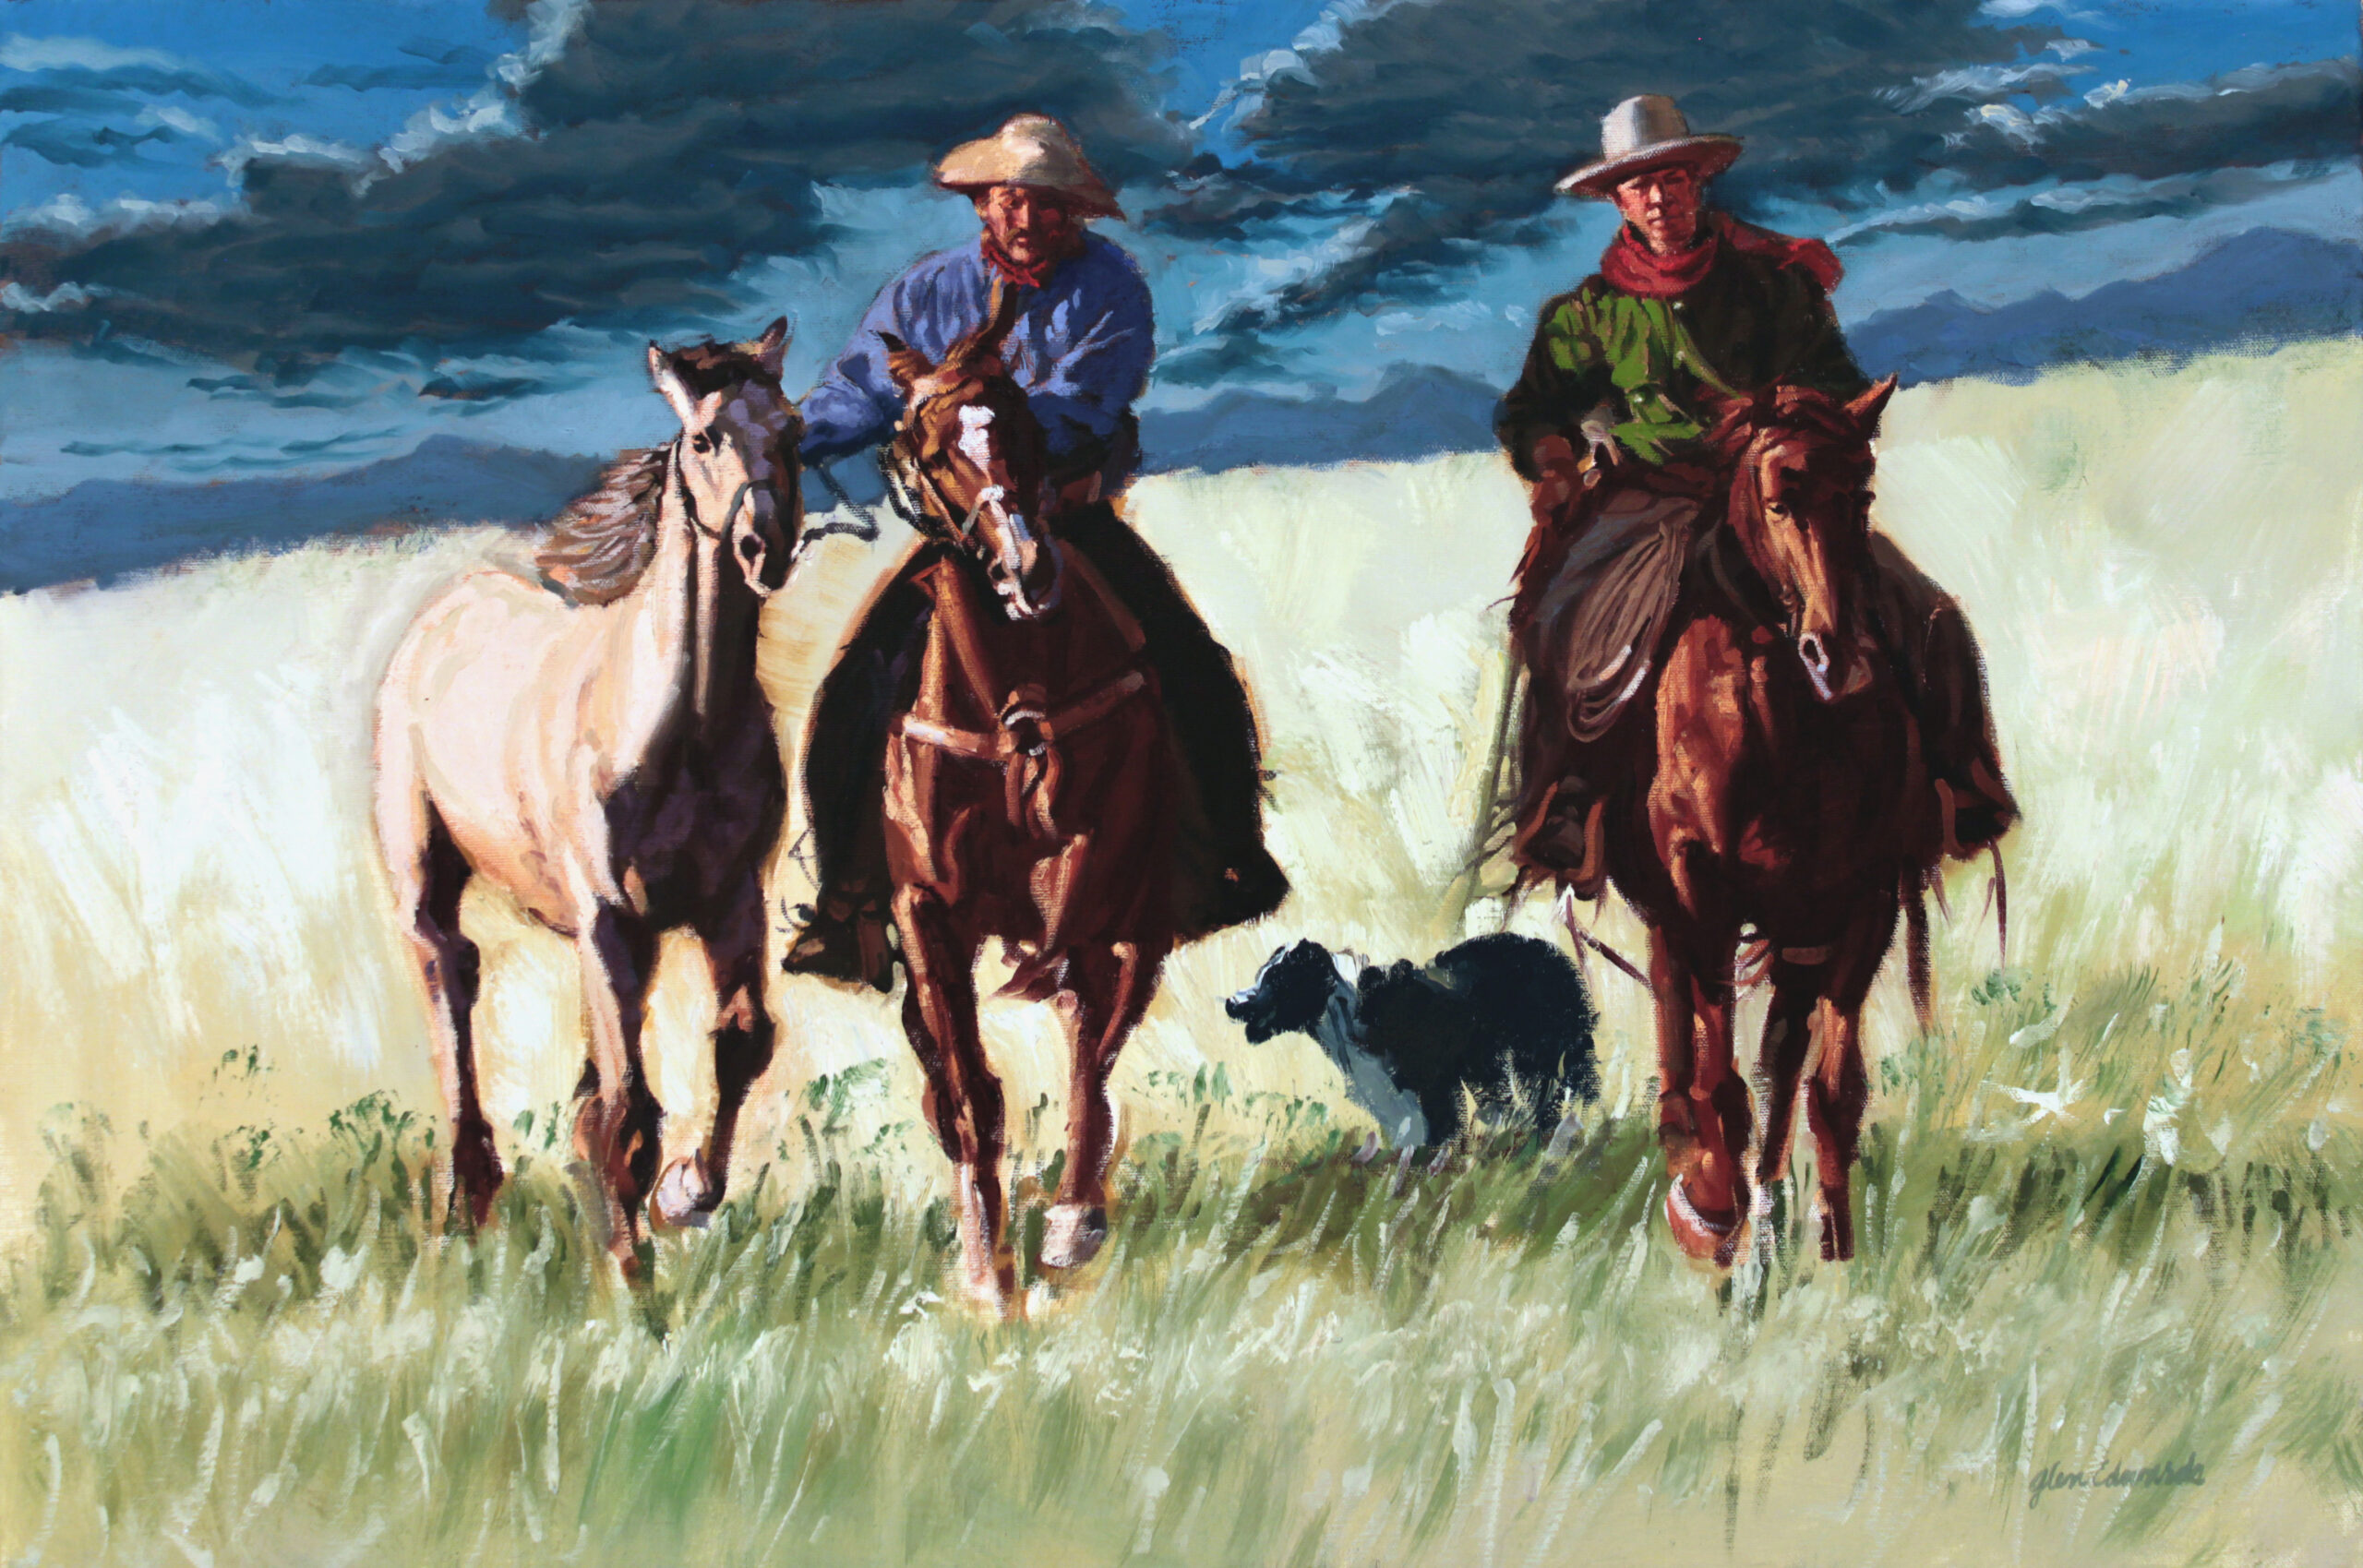 painting of two cowboy riding with a third horse and a daog